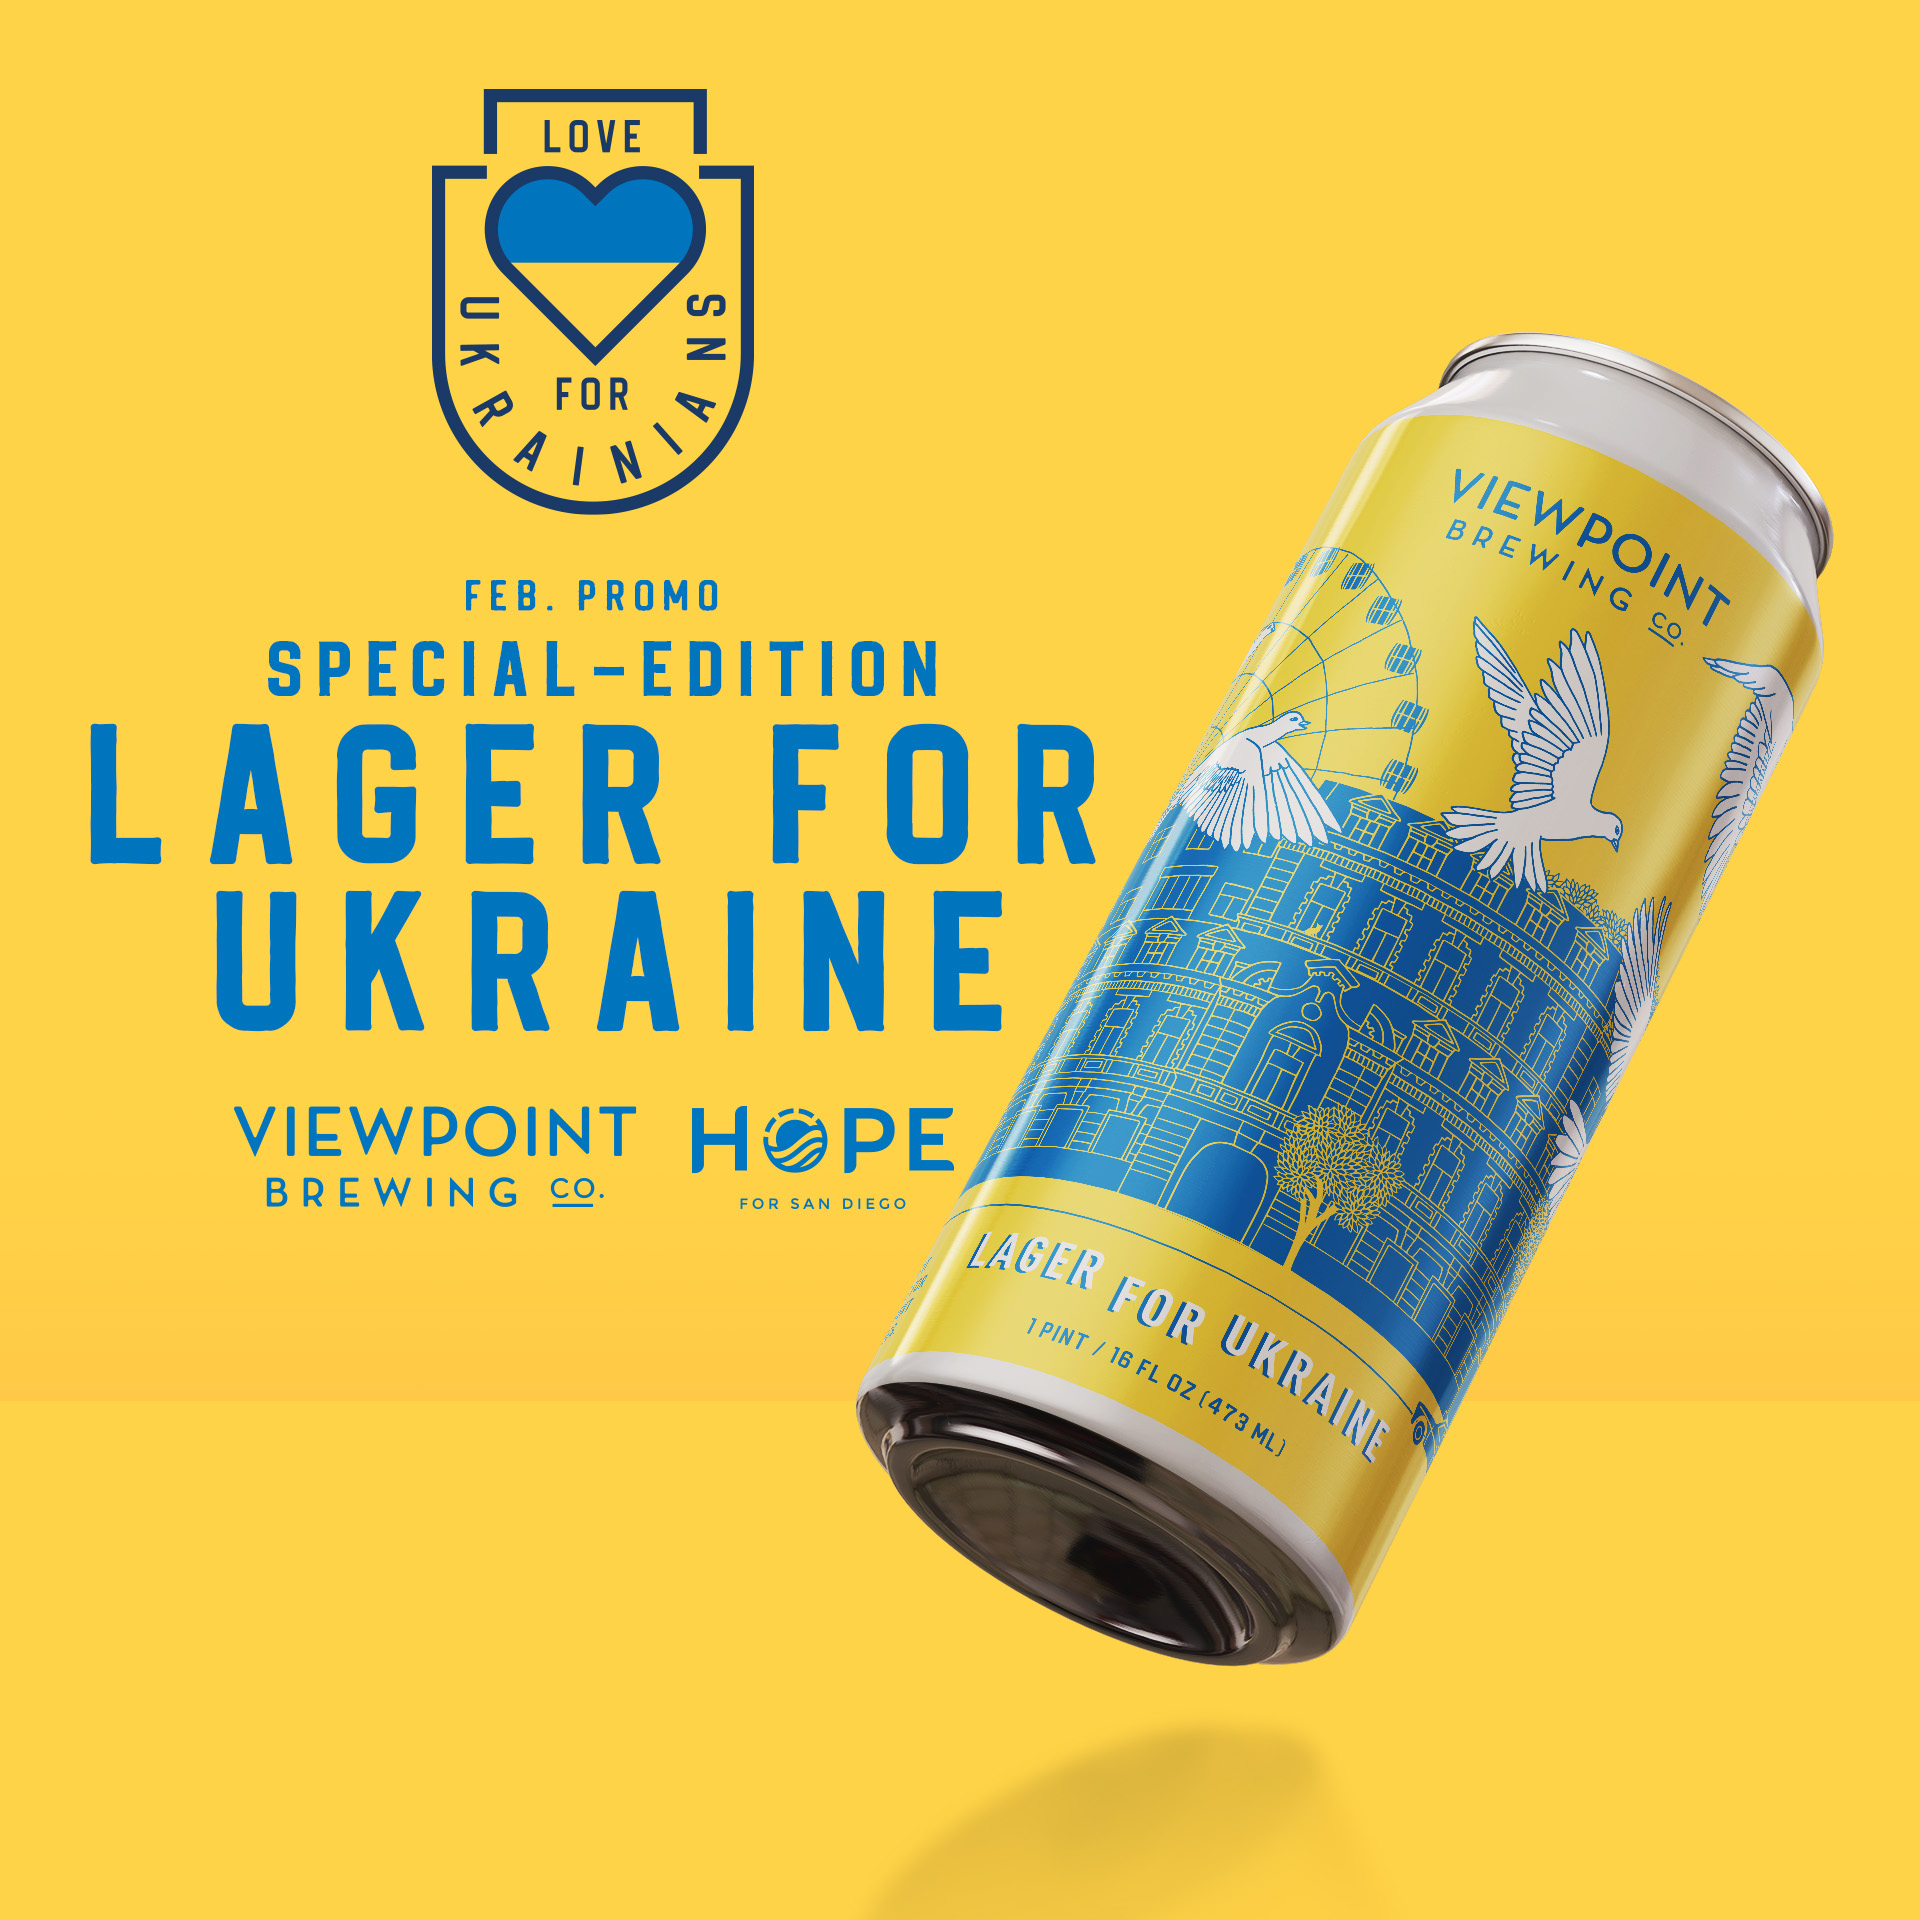 Viewpoint Brewing shows love for Ukraine with fundraisers for local refugees